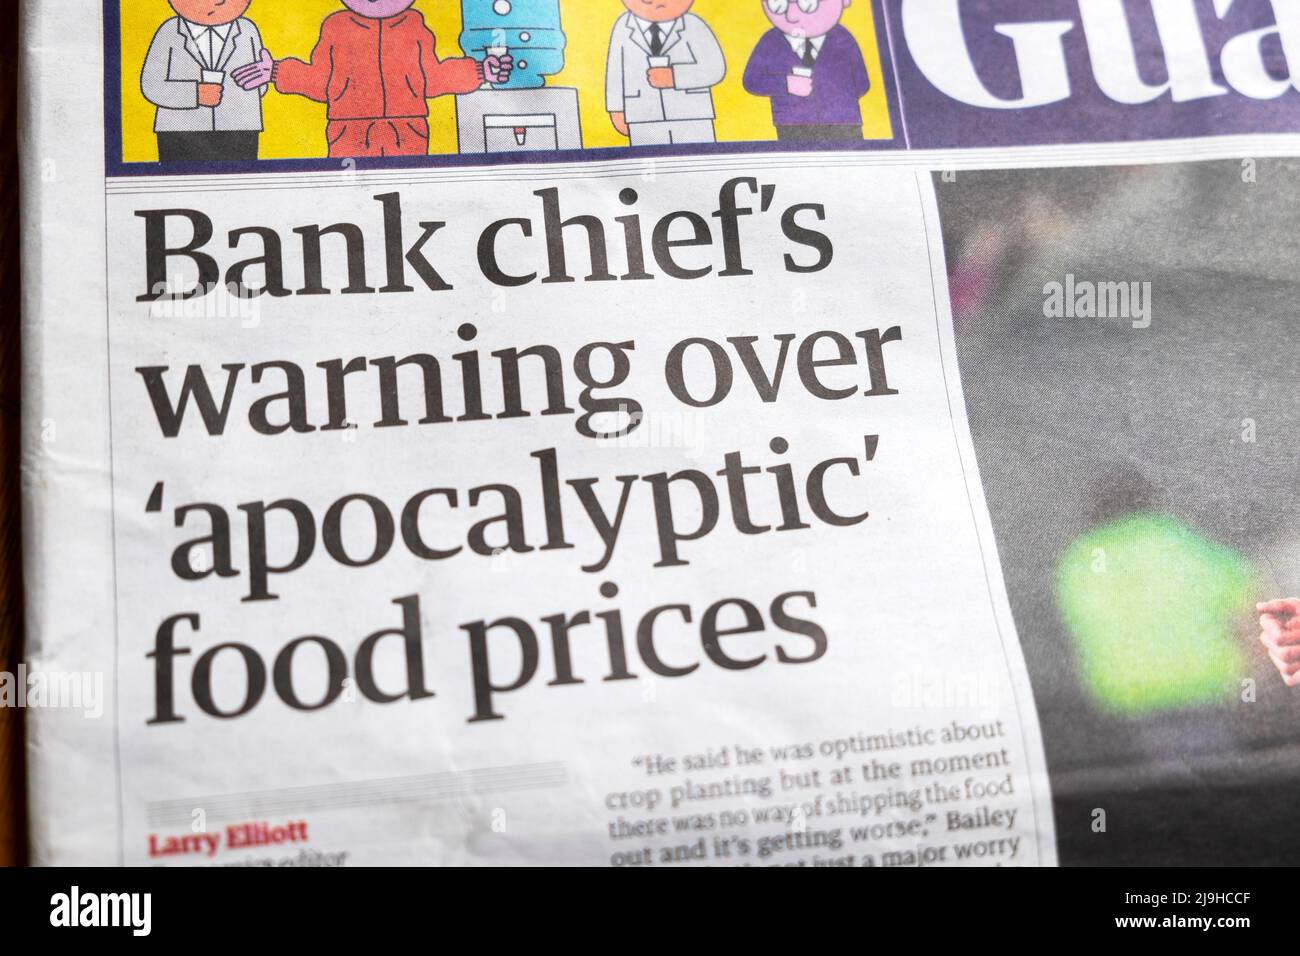 'Bank chief's warning over 'apocalyptic' food prices' Guardian newspaper headline front page cost of living clipping 17 May 2022 in London England UK Stock Photo